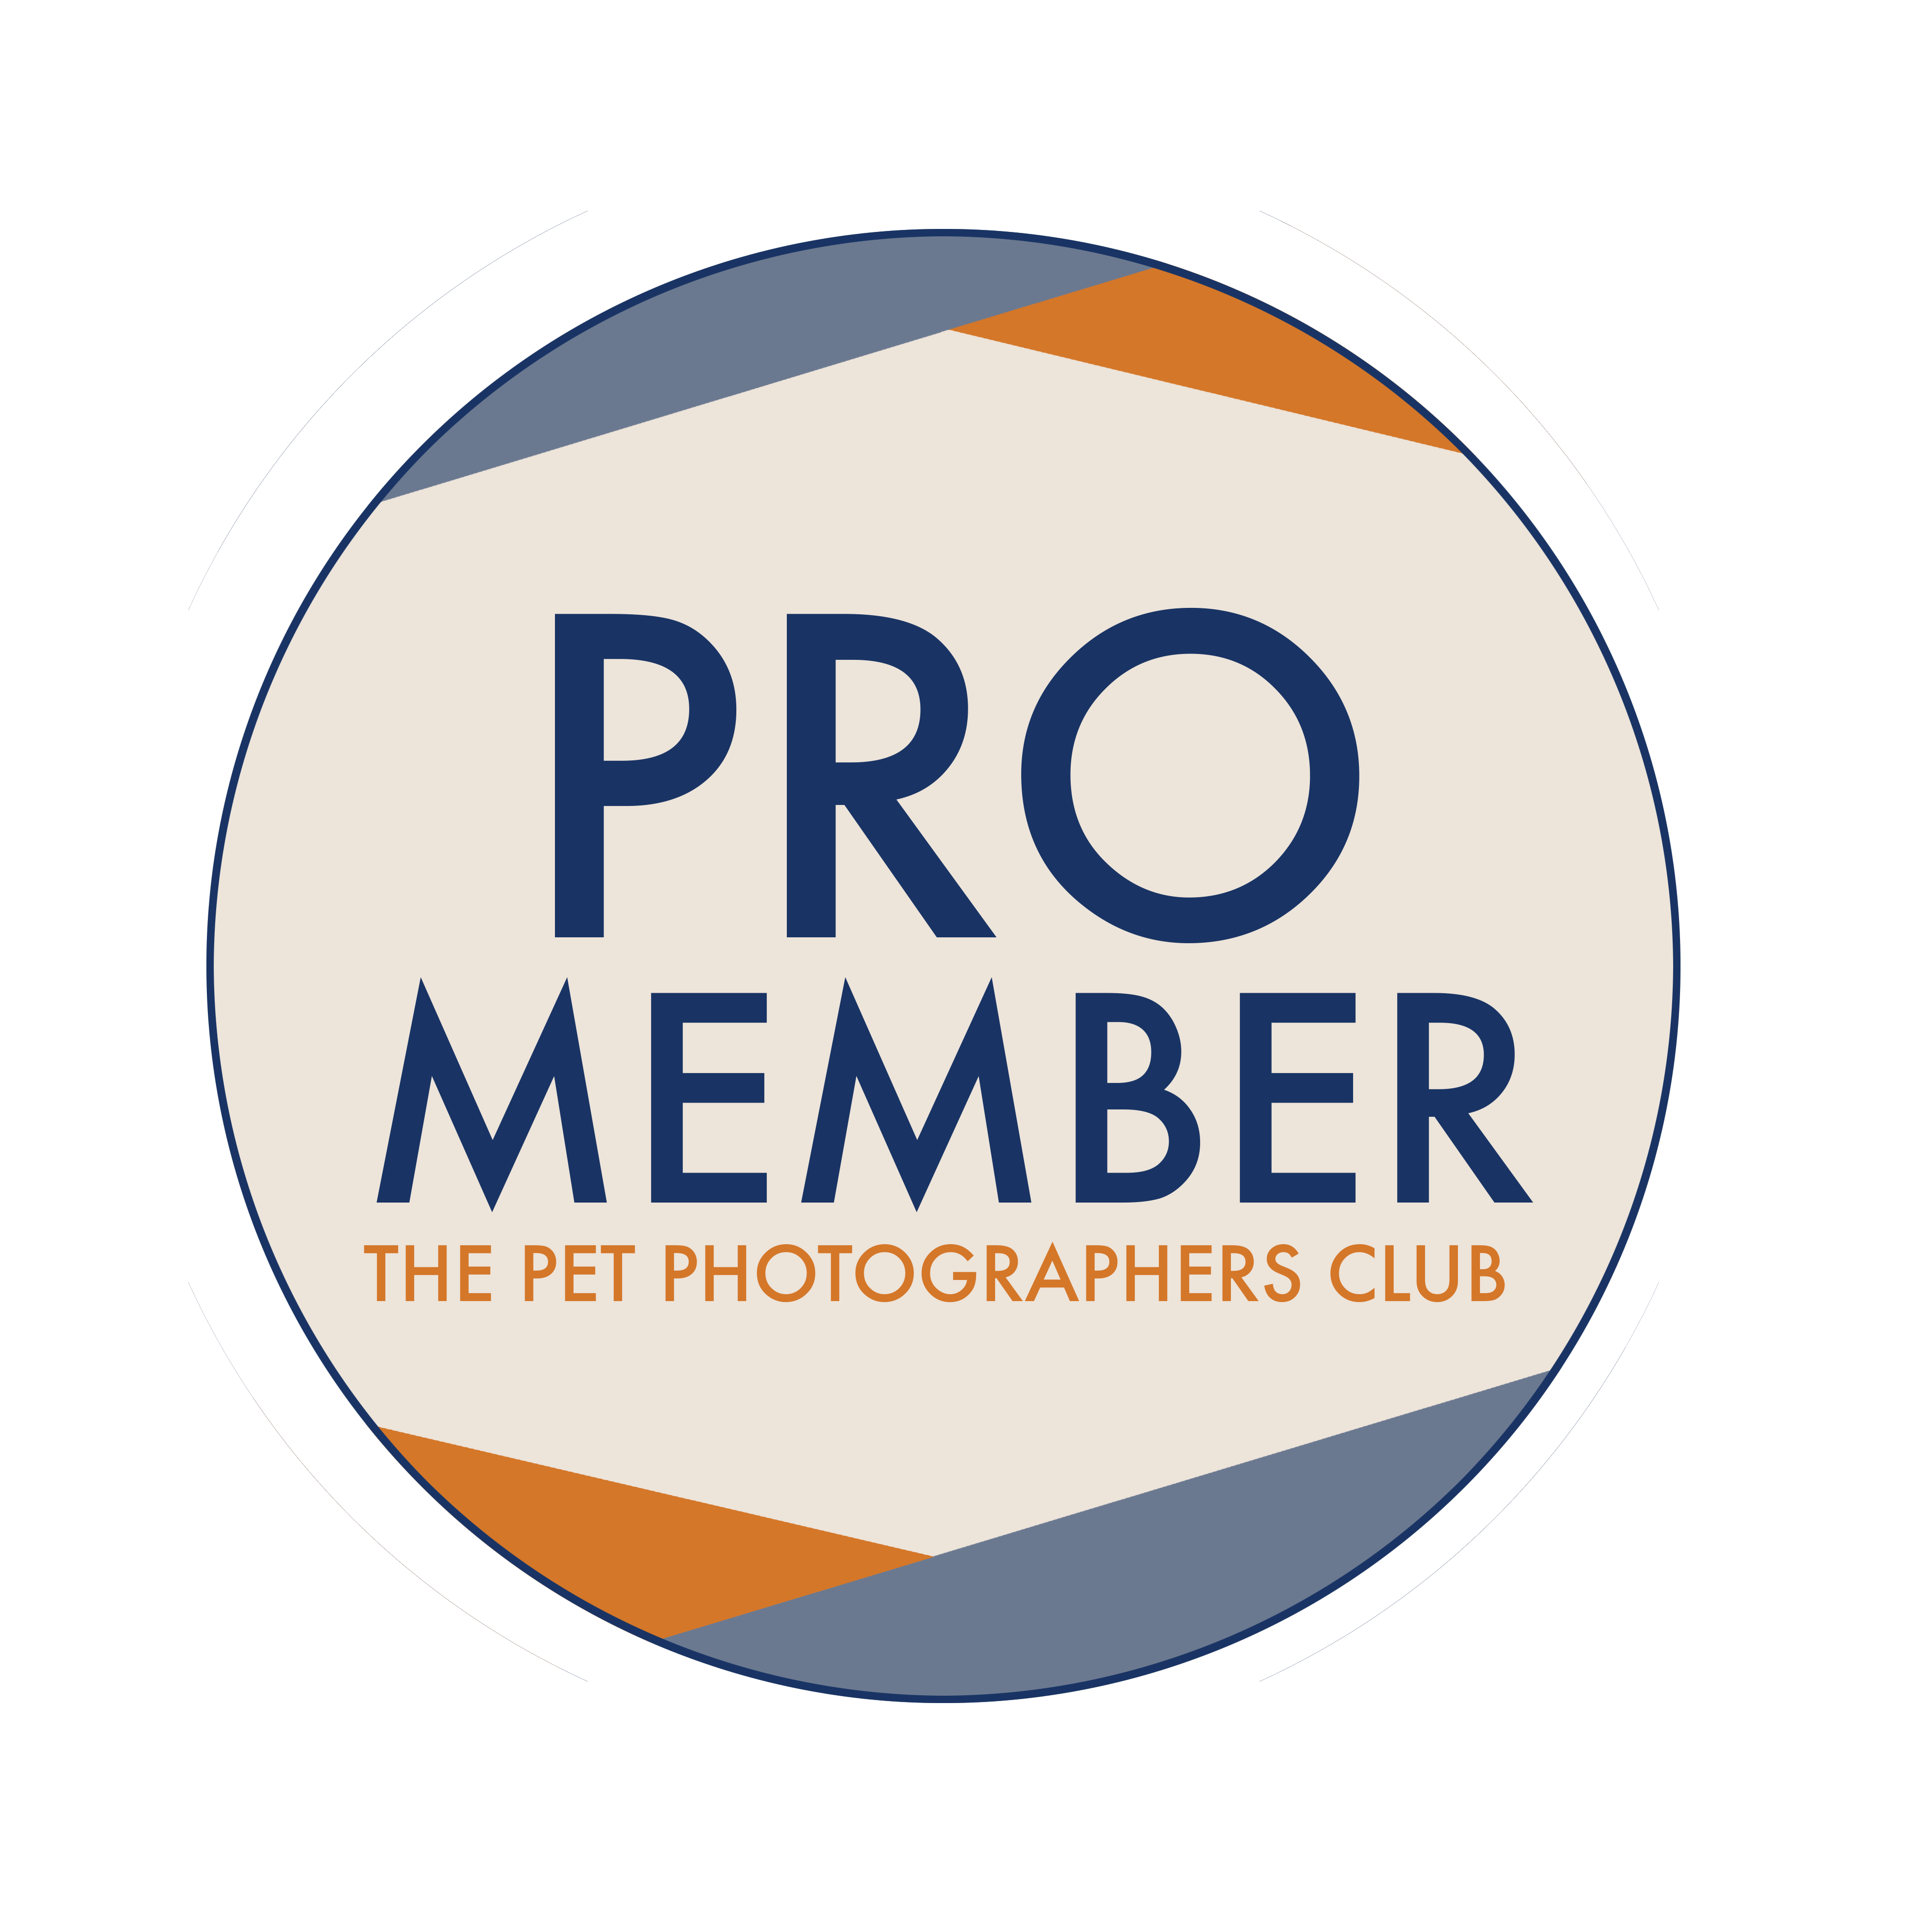 pro member badge for The Pet Photographers Club